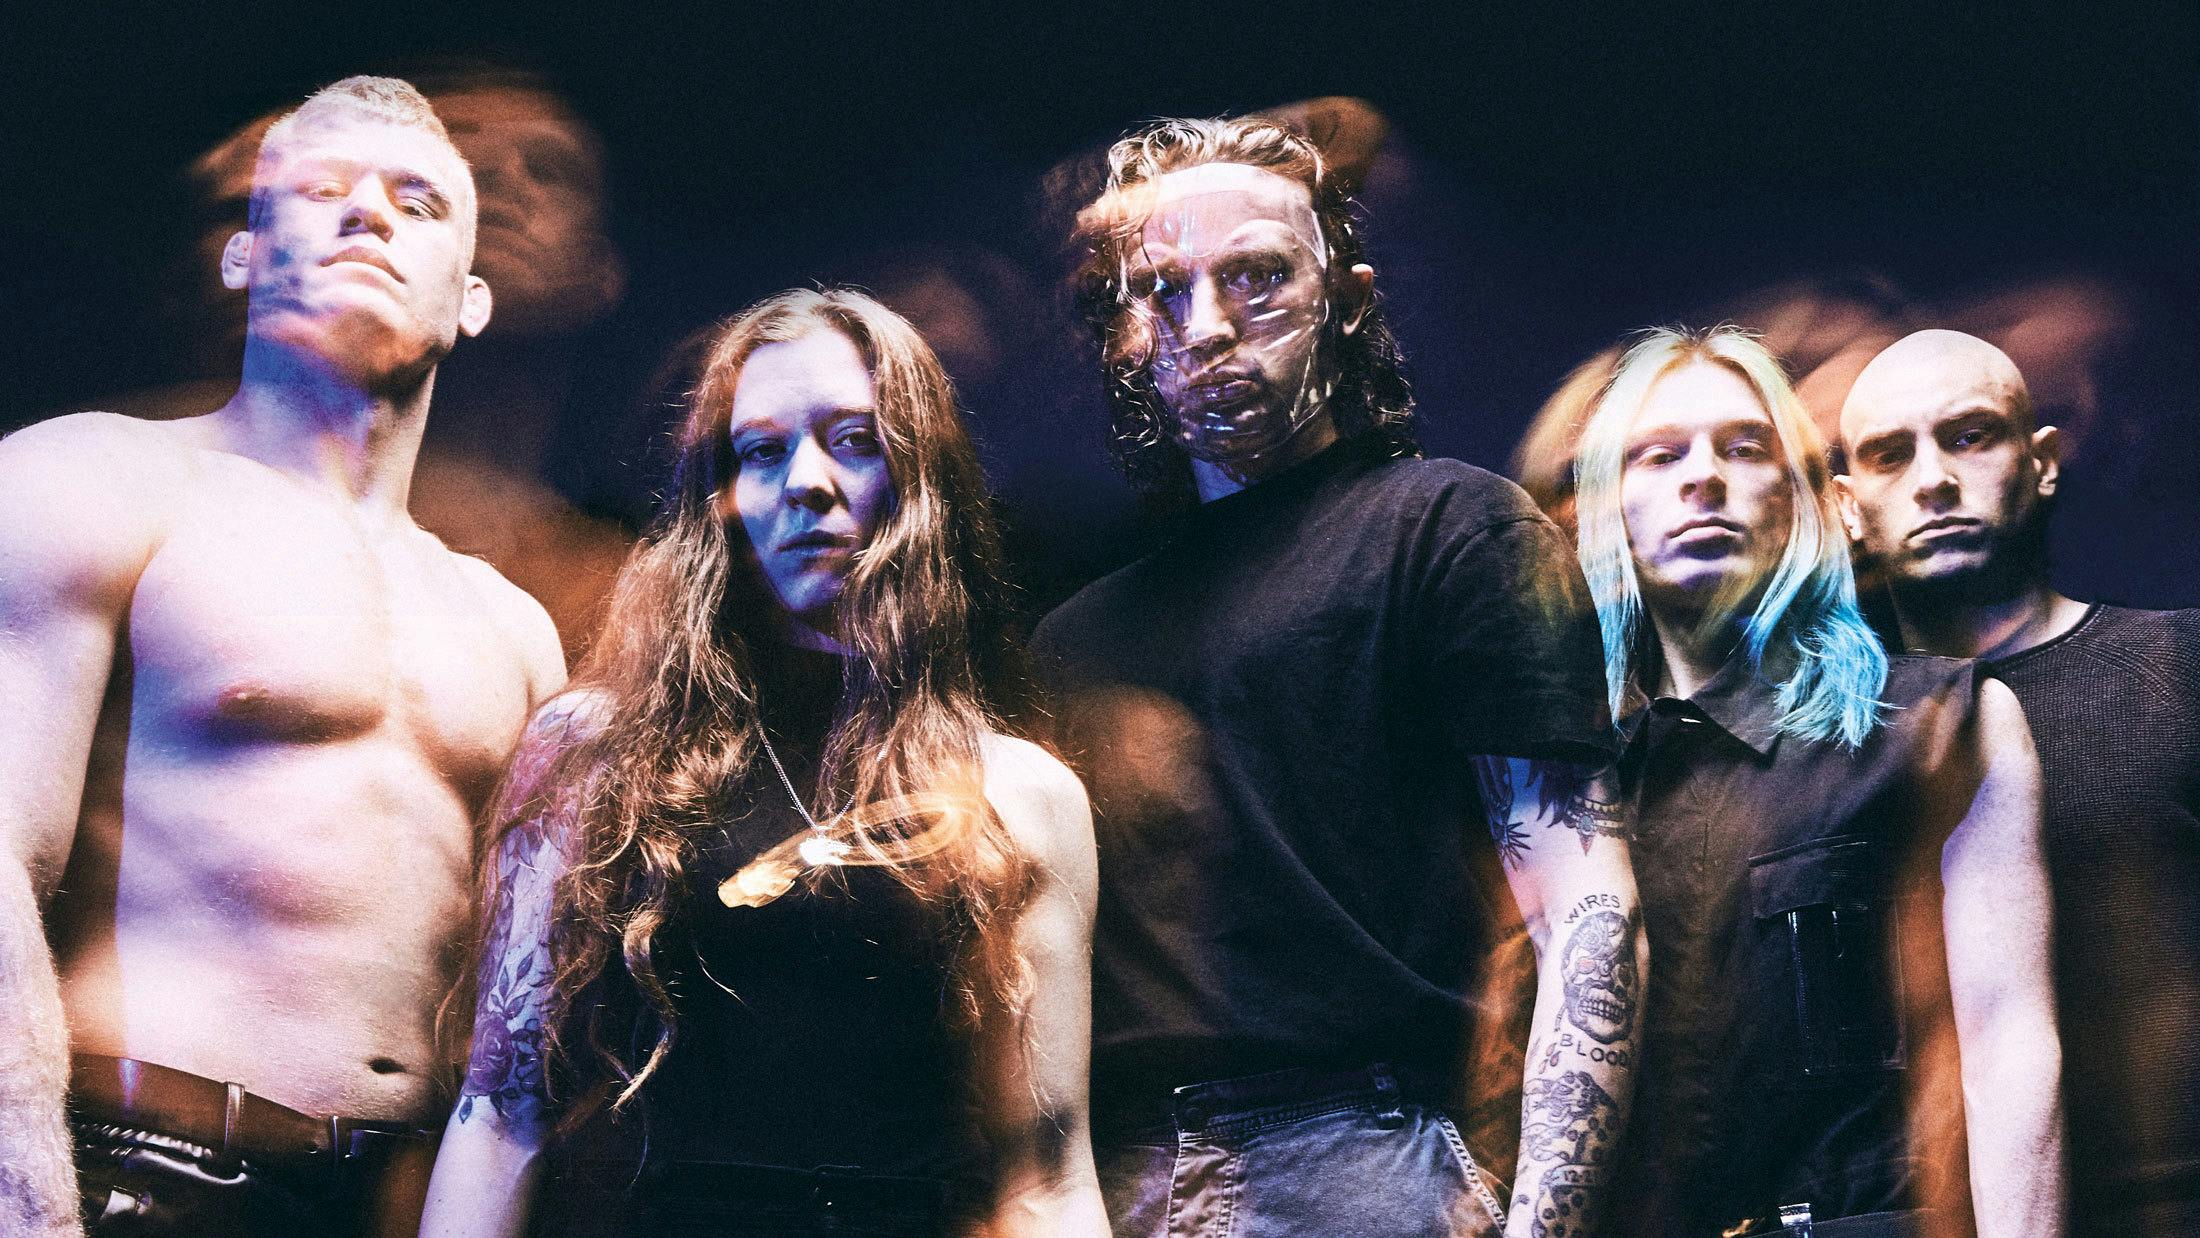 Code Orange are on a mission to change heavy music for good